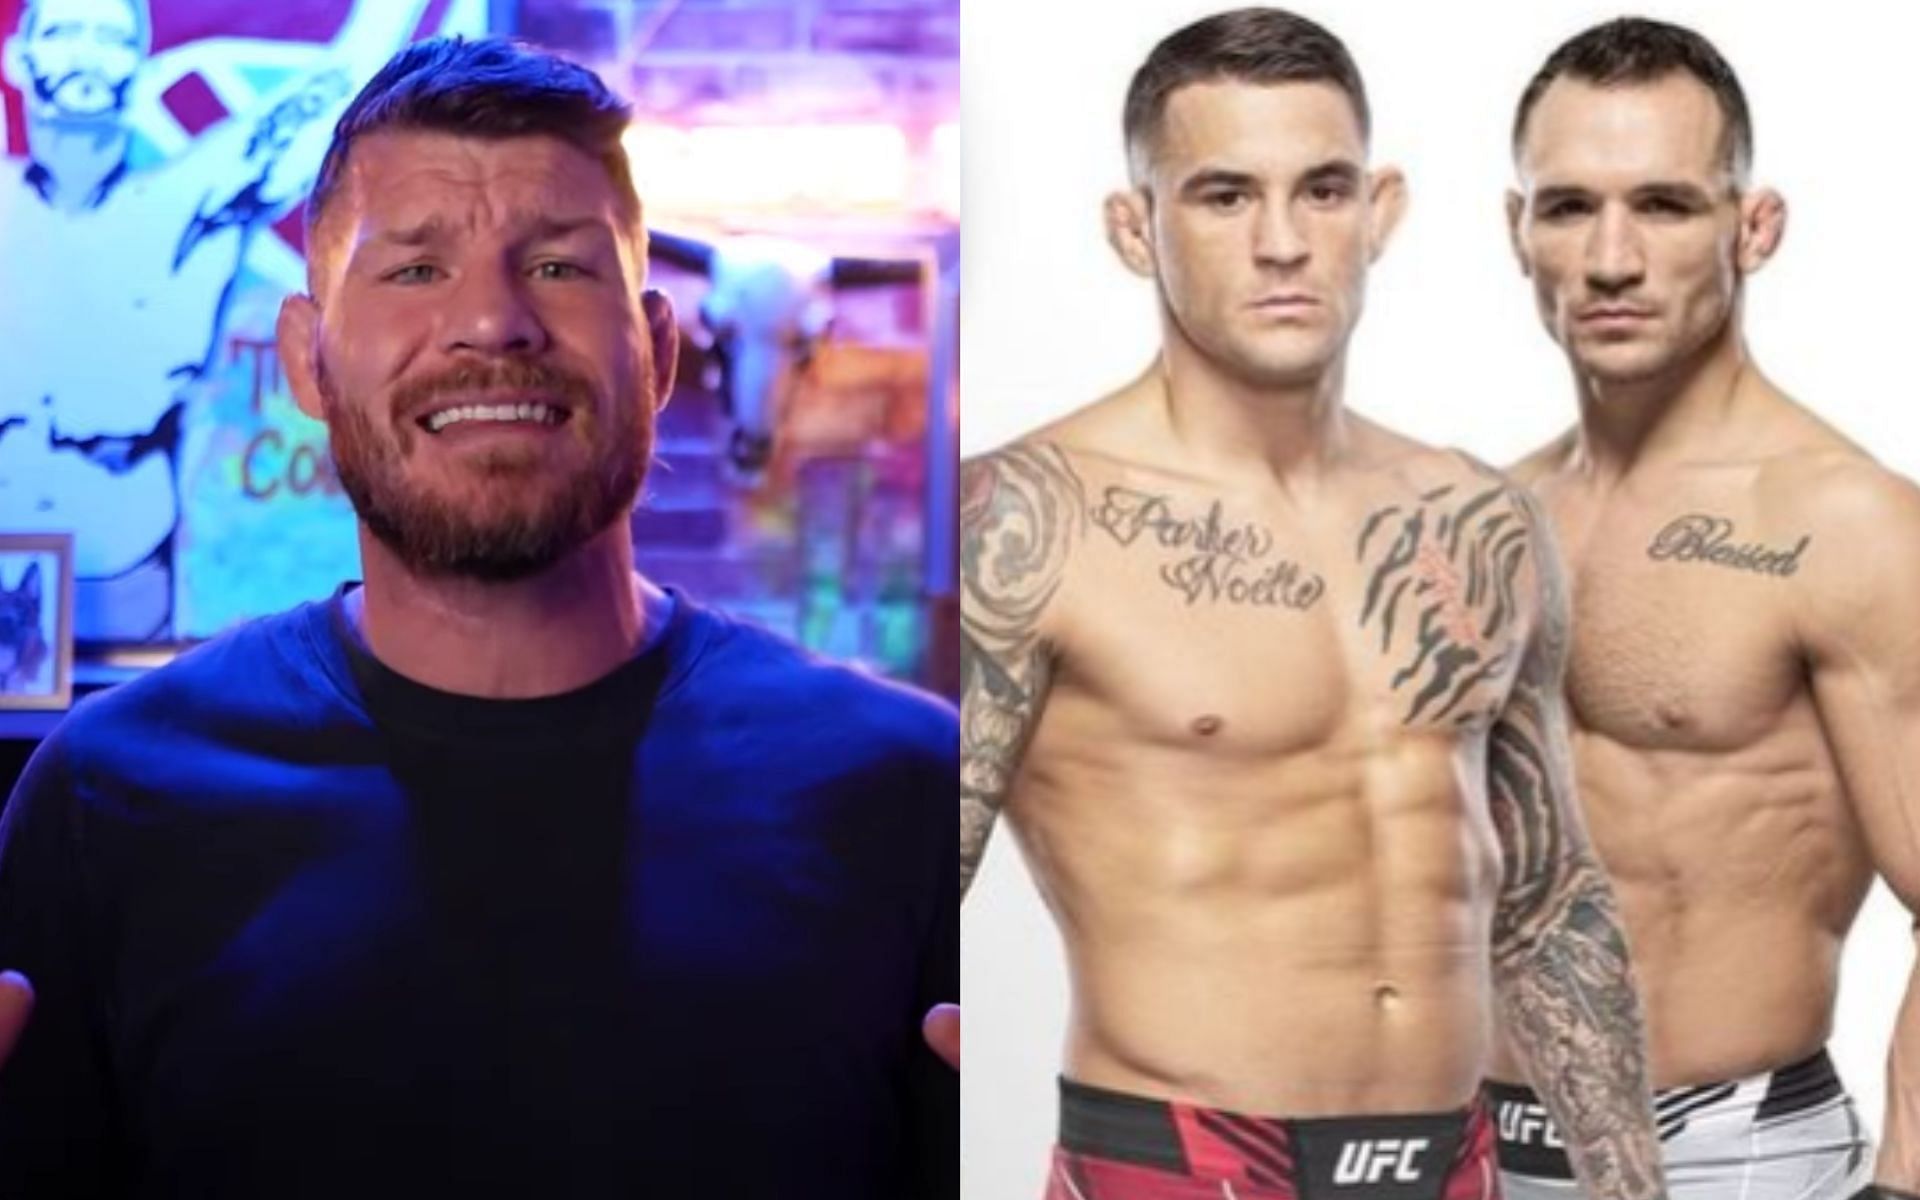 Michael Bisping (left), Dustin Poirier vs. Michael Chandler (right) [Images courtesy of @mikechandlermma on Instagram &amp; Michael Bisping on YouTube]